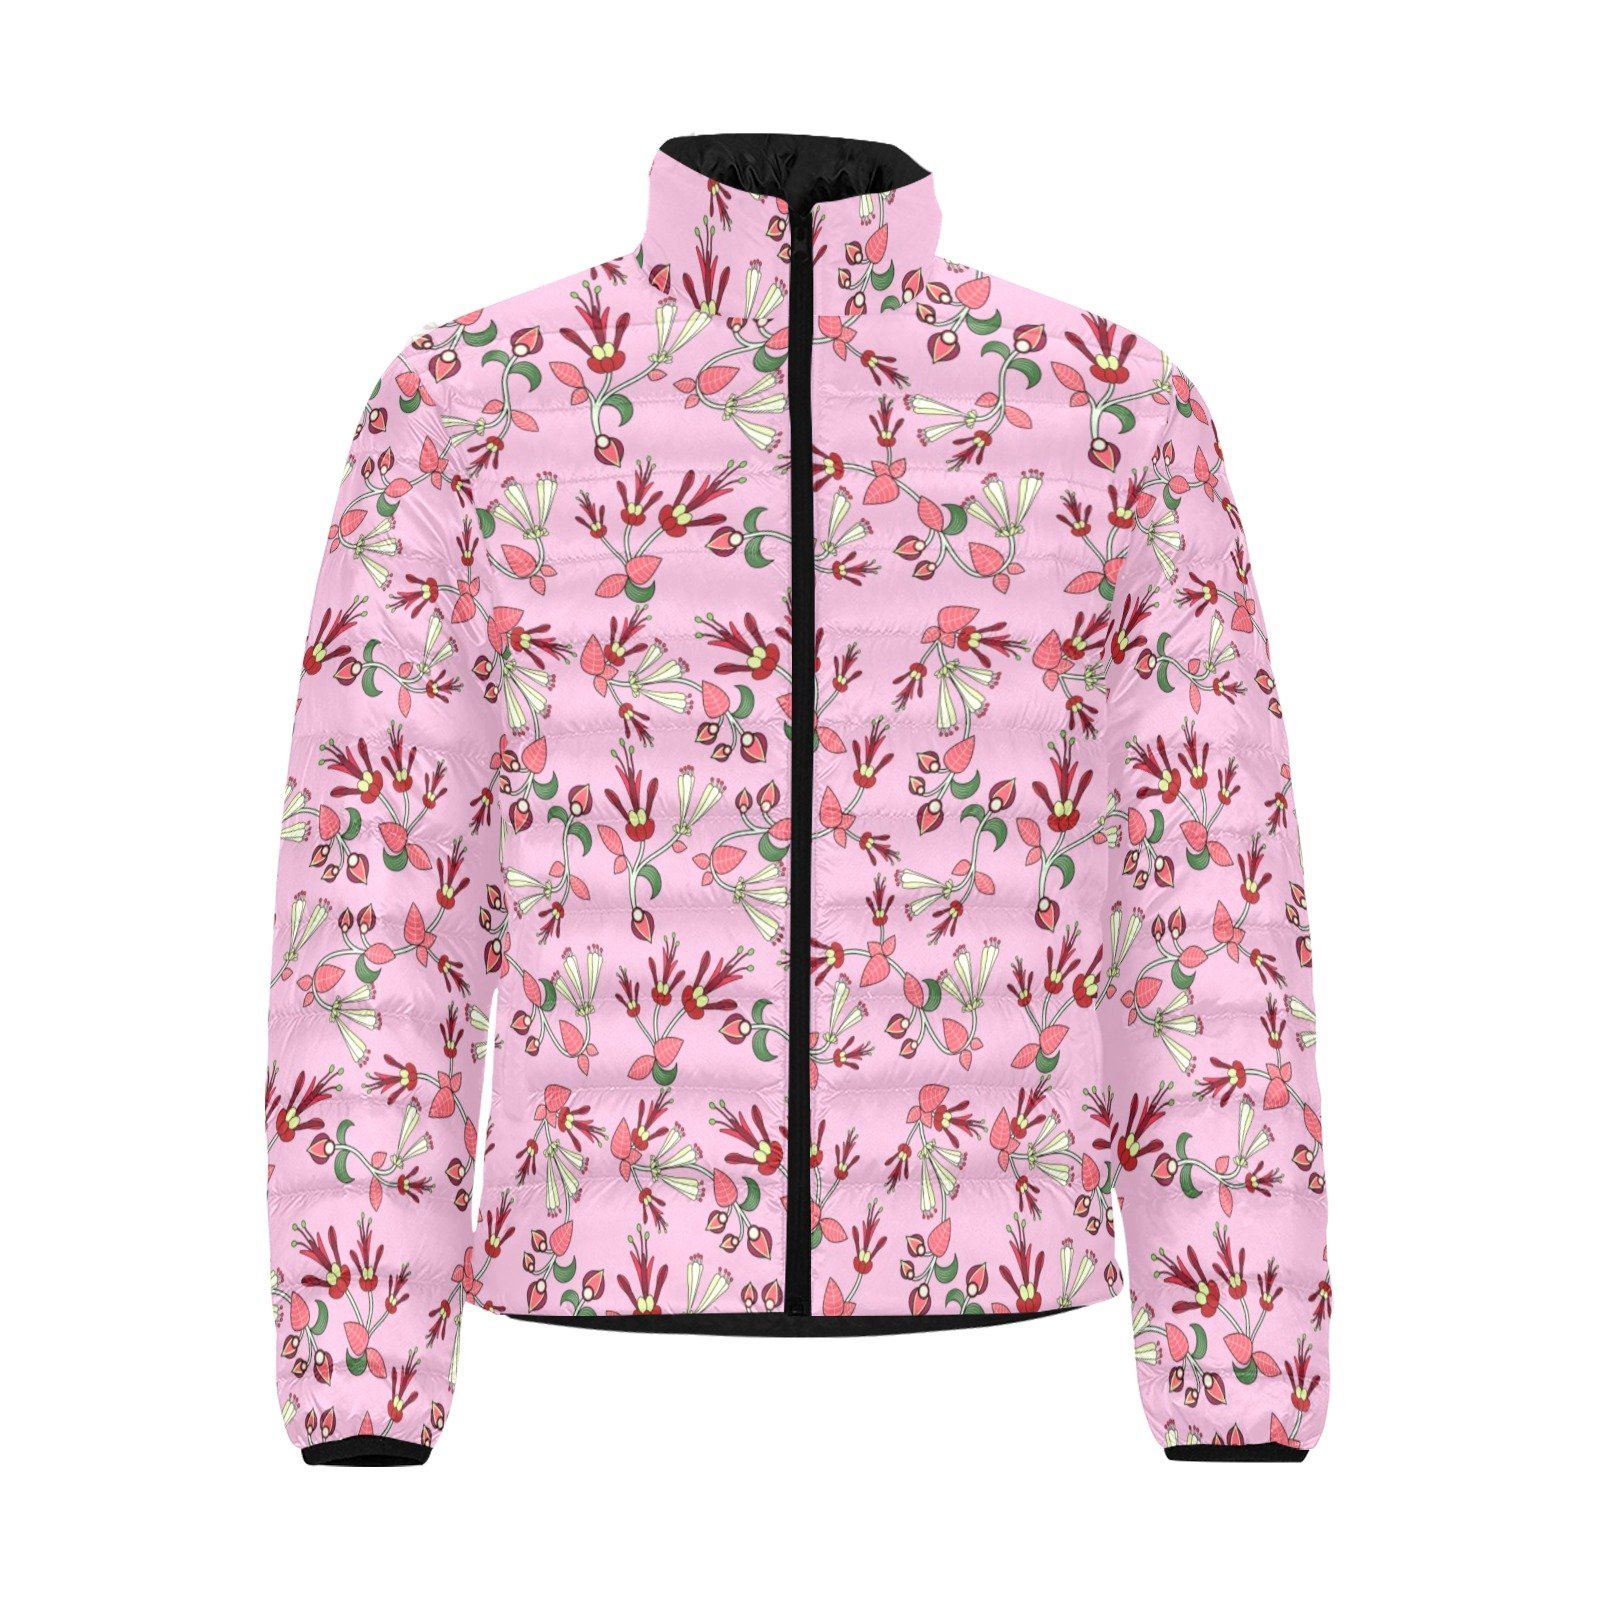 Strawberry Floral Men's Stand Collar Padded Jacket (Model H41) Men's Stand Collar Padded Jacket (H41) e-joyer 